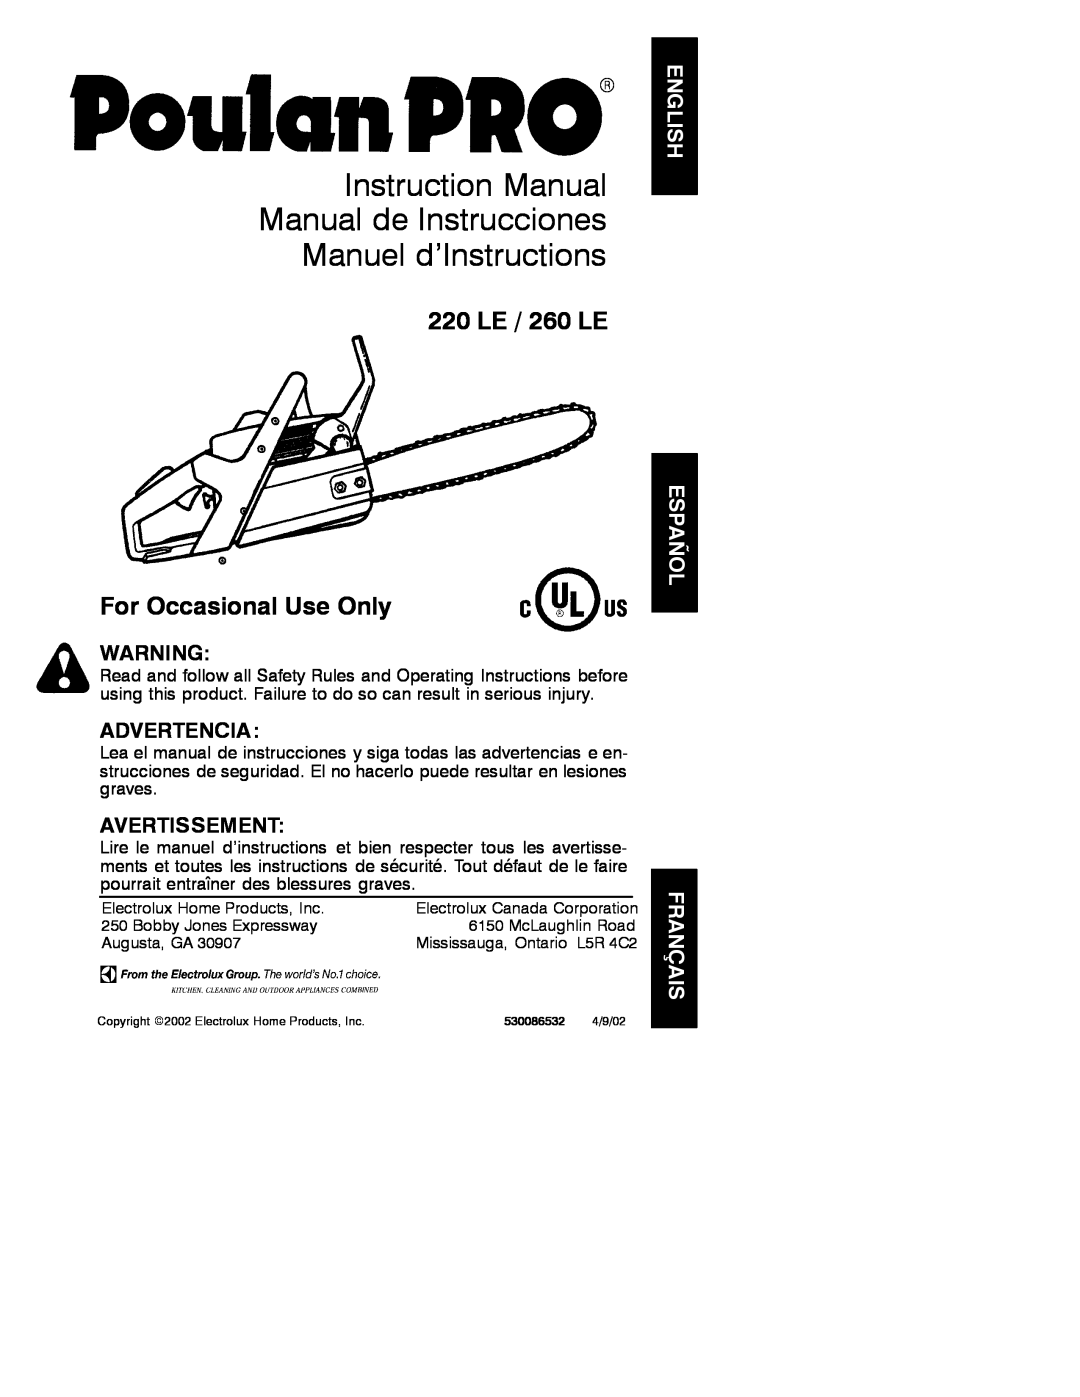 Poulan 530086532 instruction manual 220 LE / 260 LE For Occasional Use Only, Advertencia, Avertissement 